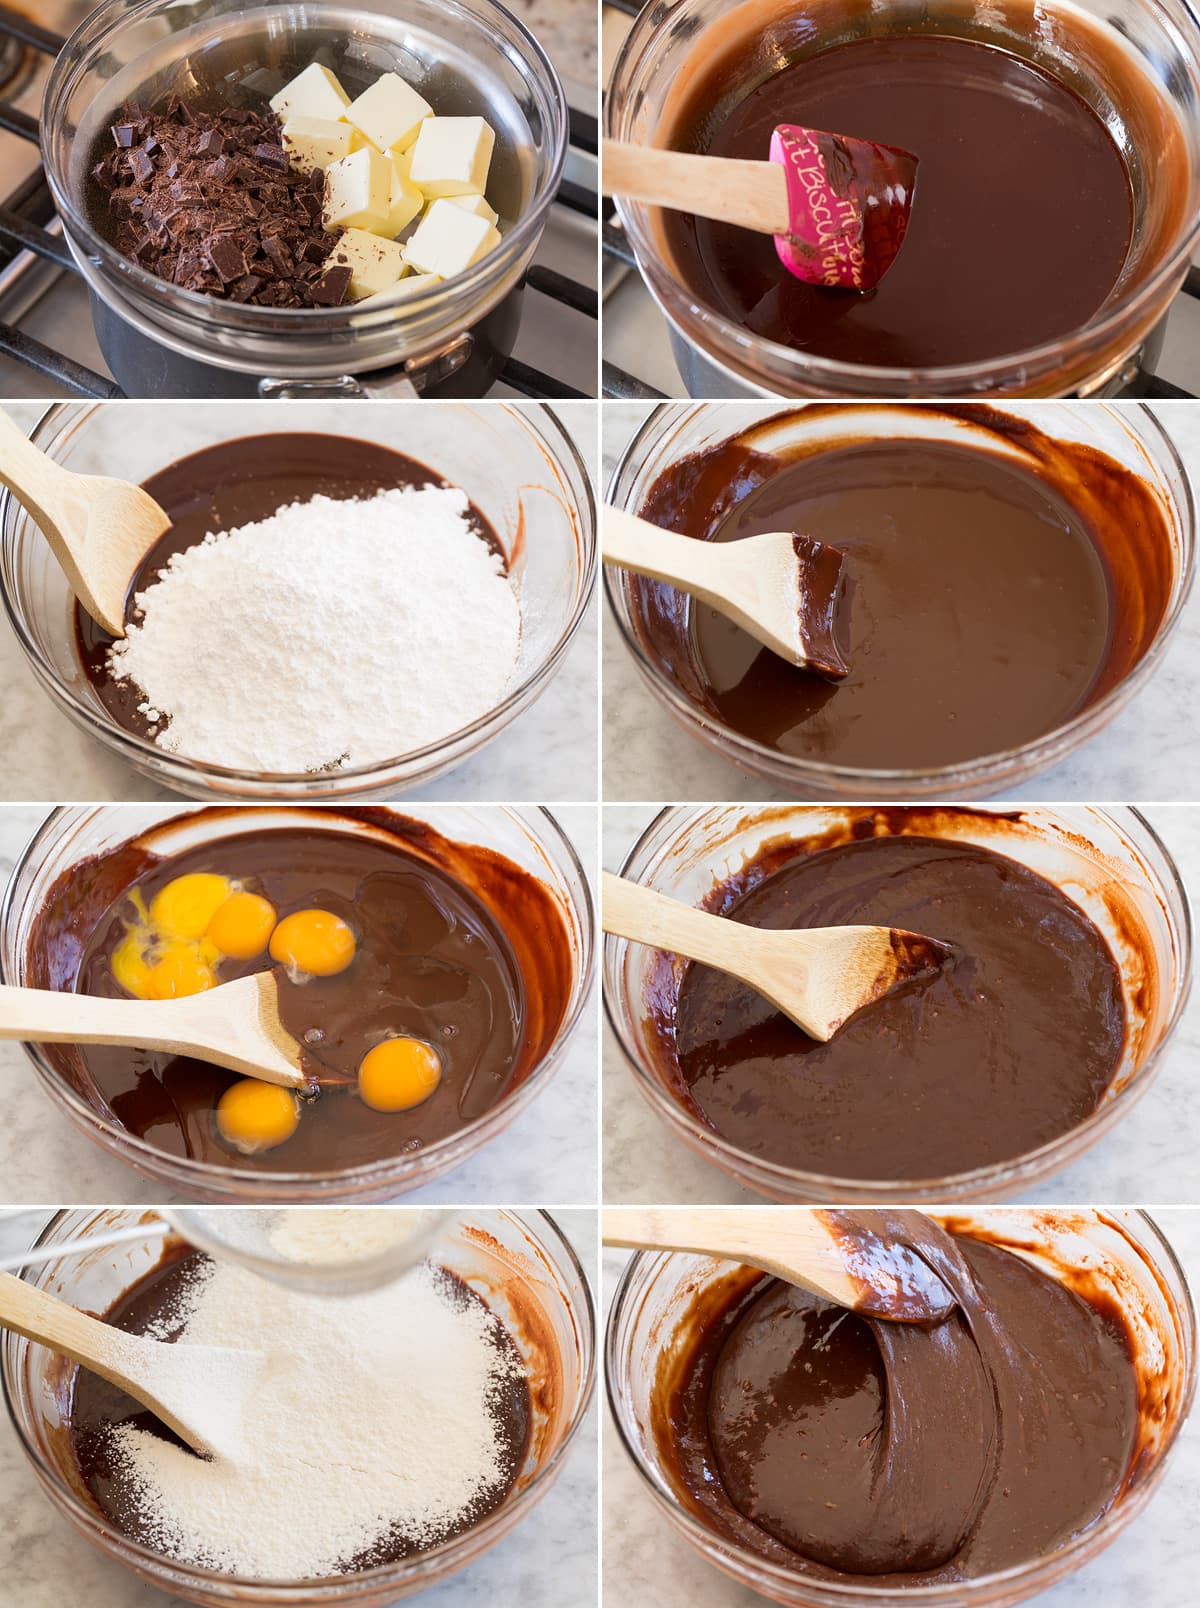 Collage of photos showing steps of making chocolate lava cake batter in a mixing bowl.